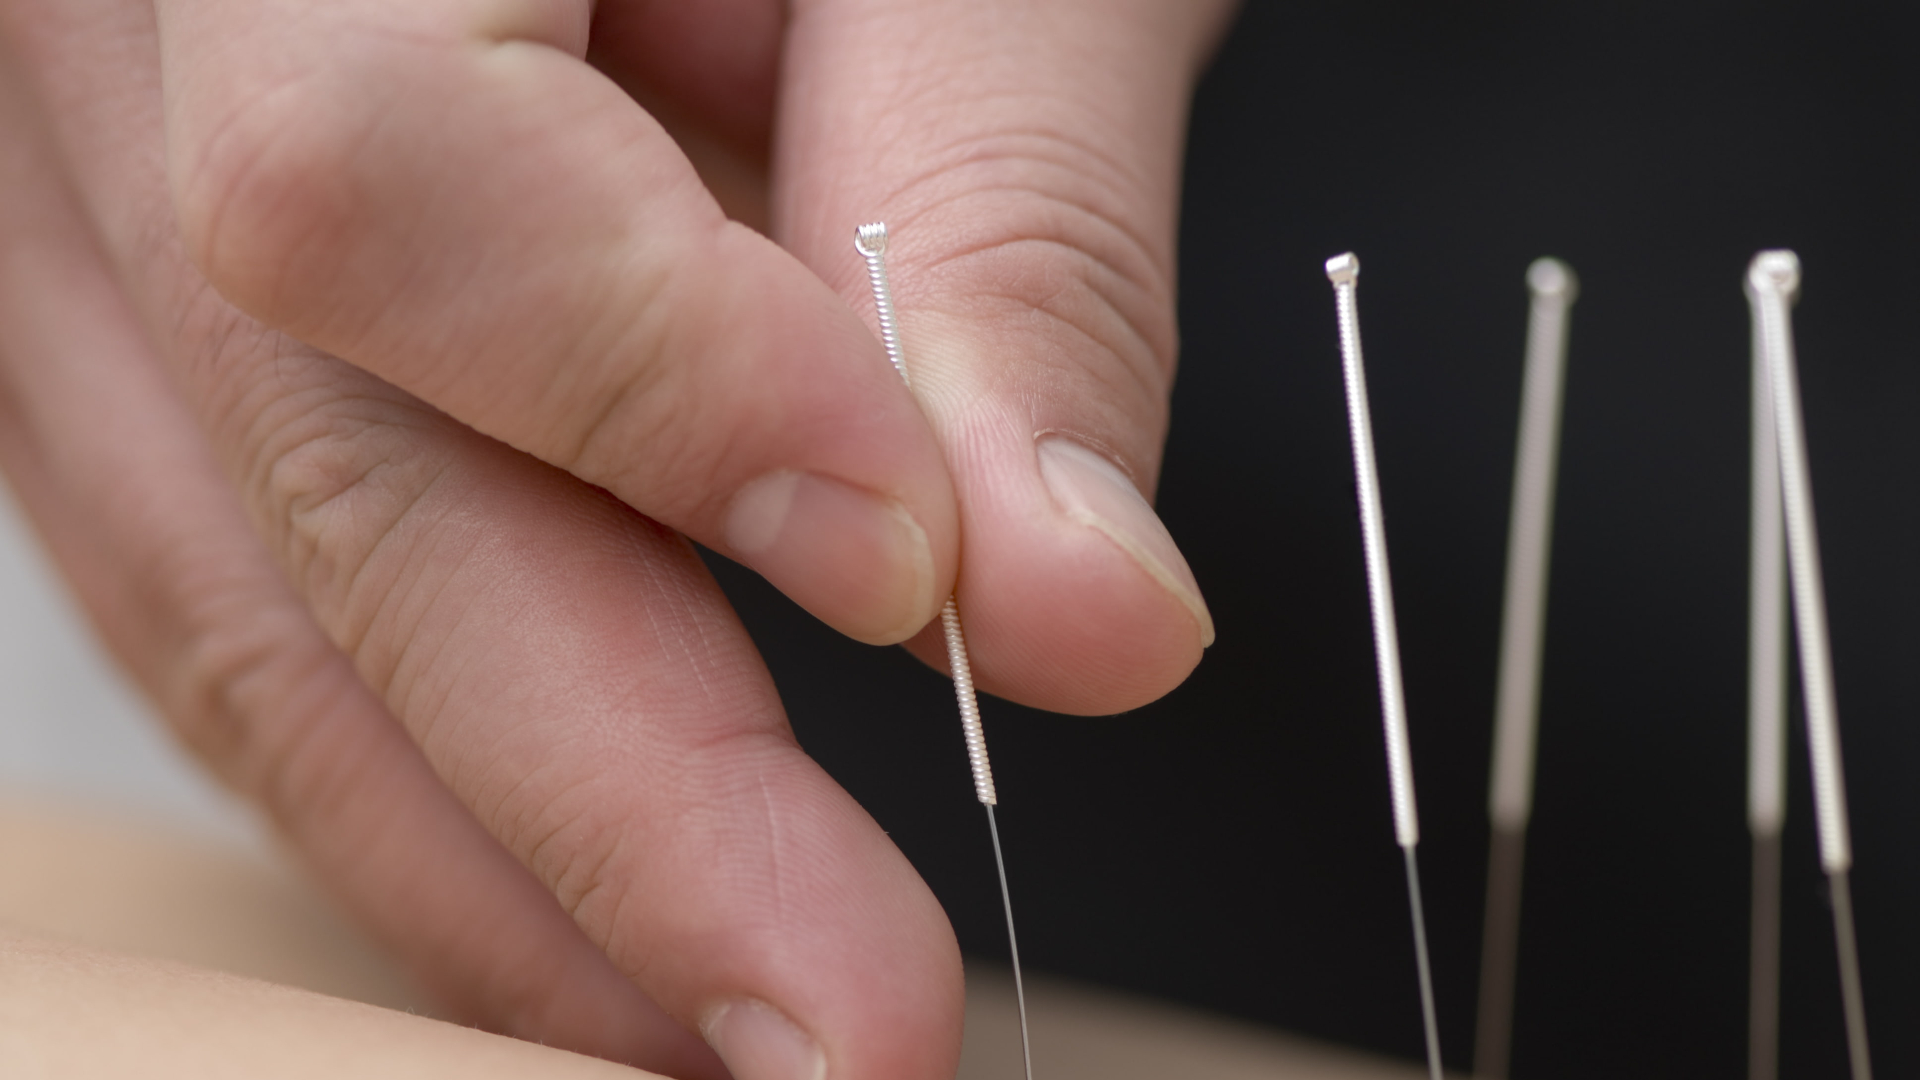 Acupuncture Injection Therapy Training